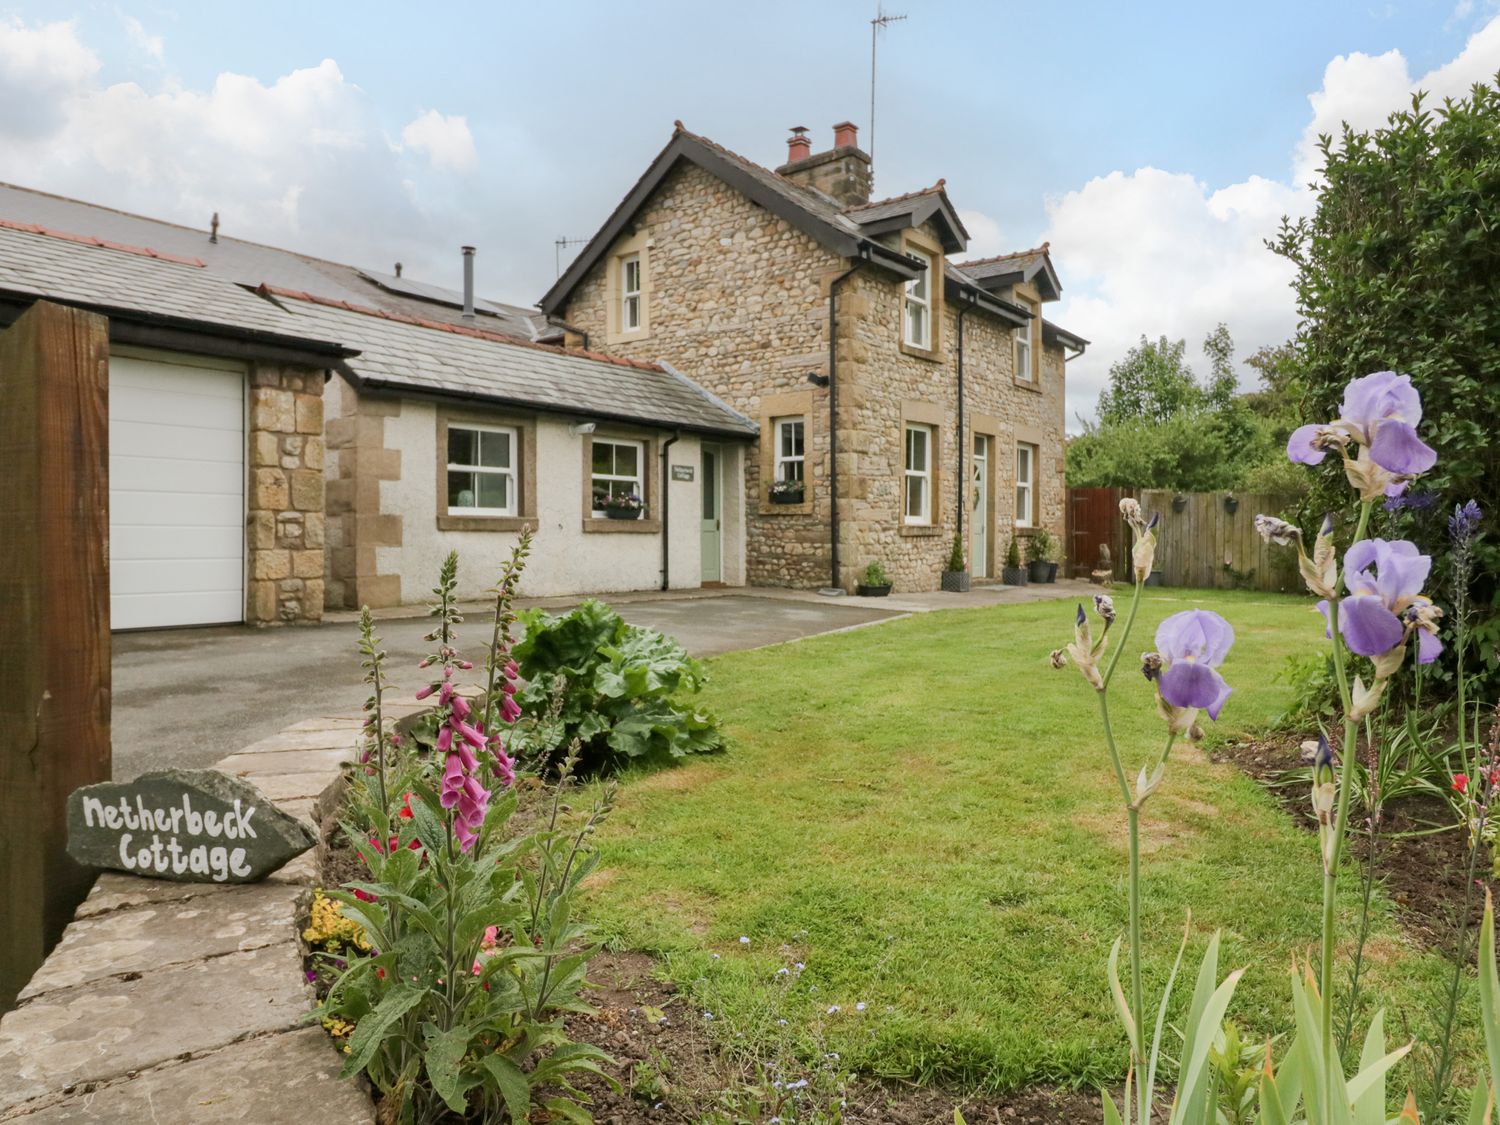 Netherbeck Cottage - Lake District - 1115995 - photo 1